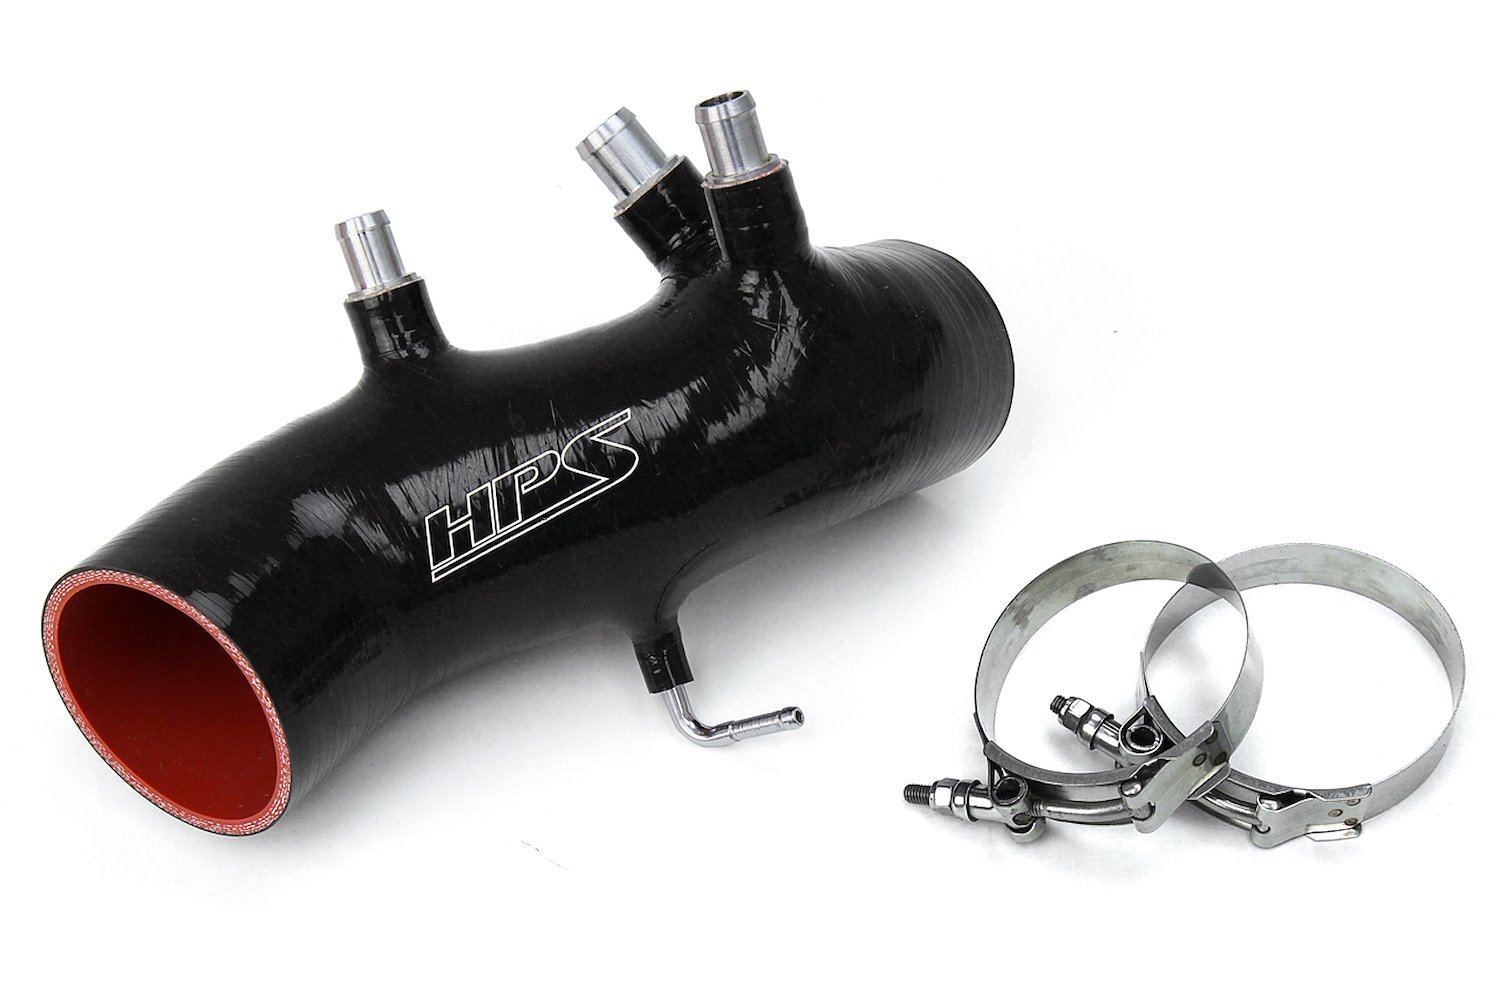 87-17882-BLK Silicone Air Intake, Replace Stock Restrictive Air Intake, Improve Throttle Response, No Heat Soak